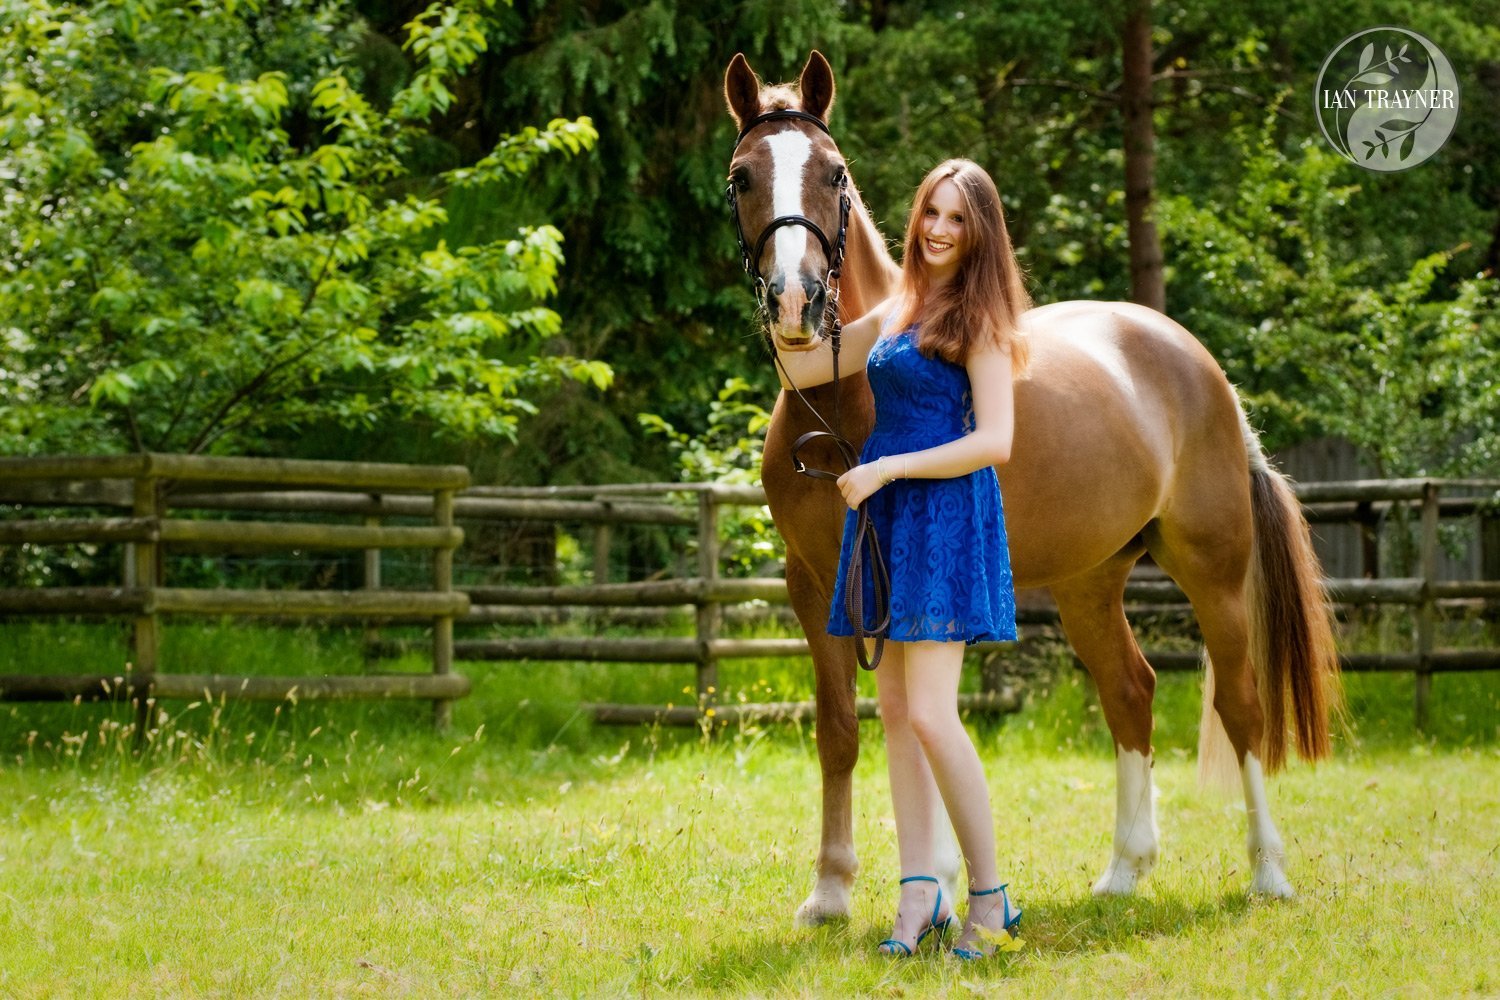 Glamorous photo of beautiful young woman with her horse. Equine photography by Ian Trayner